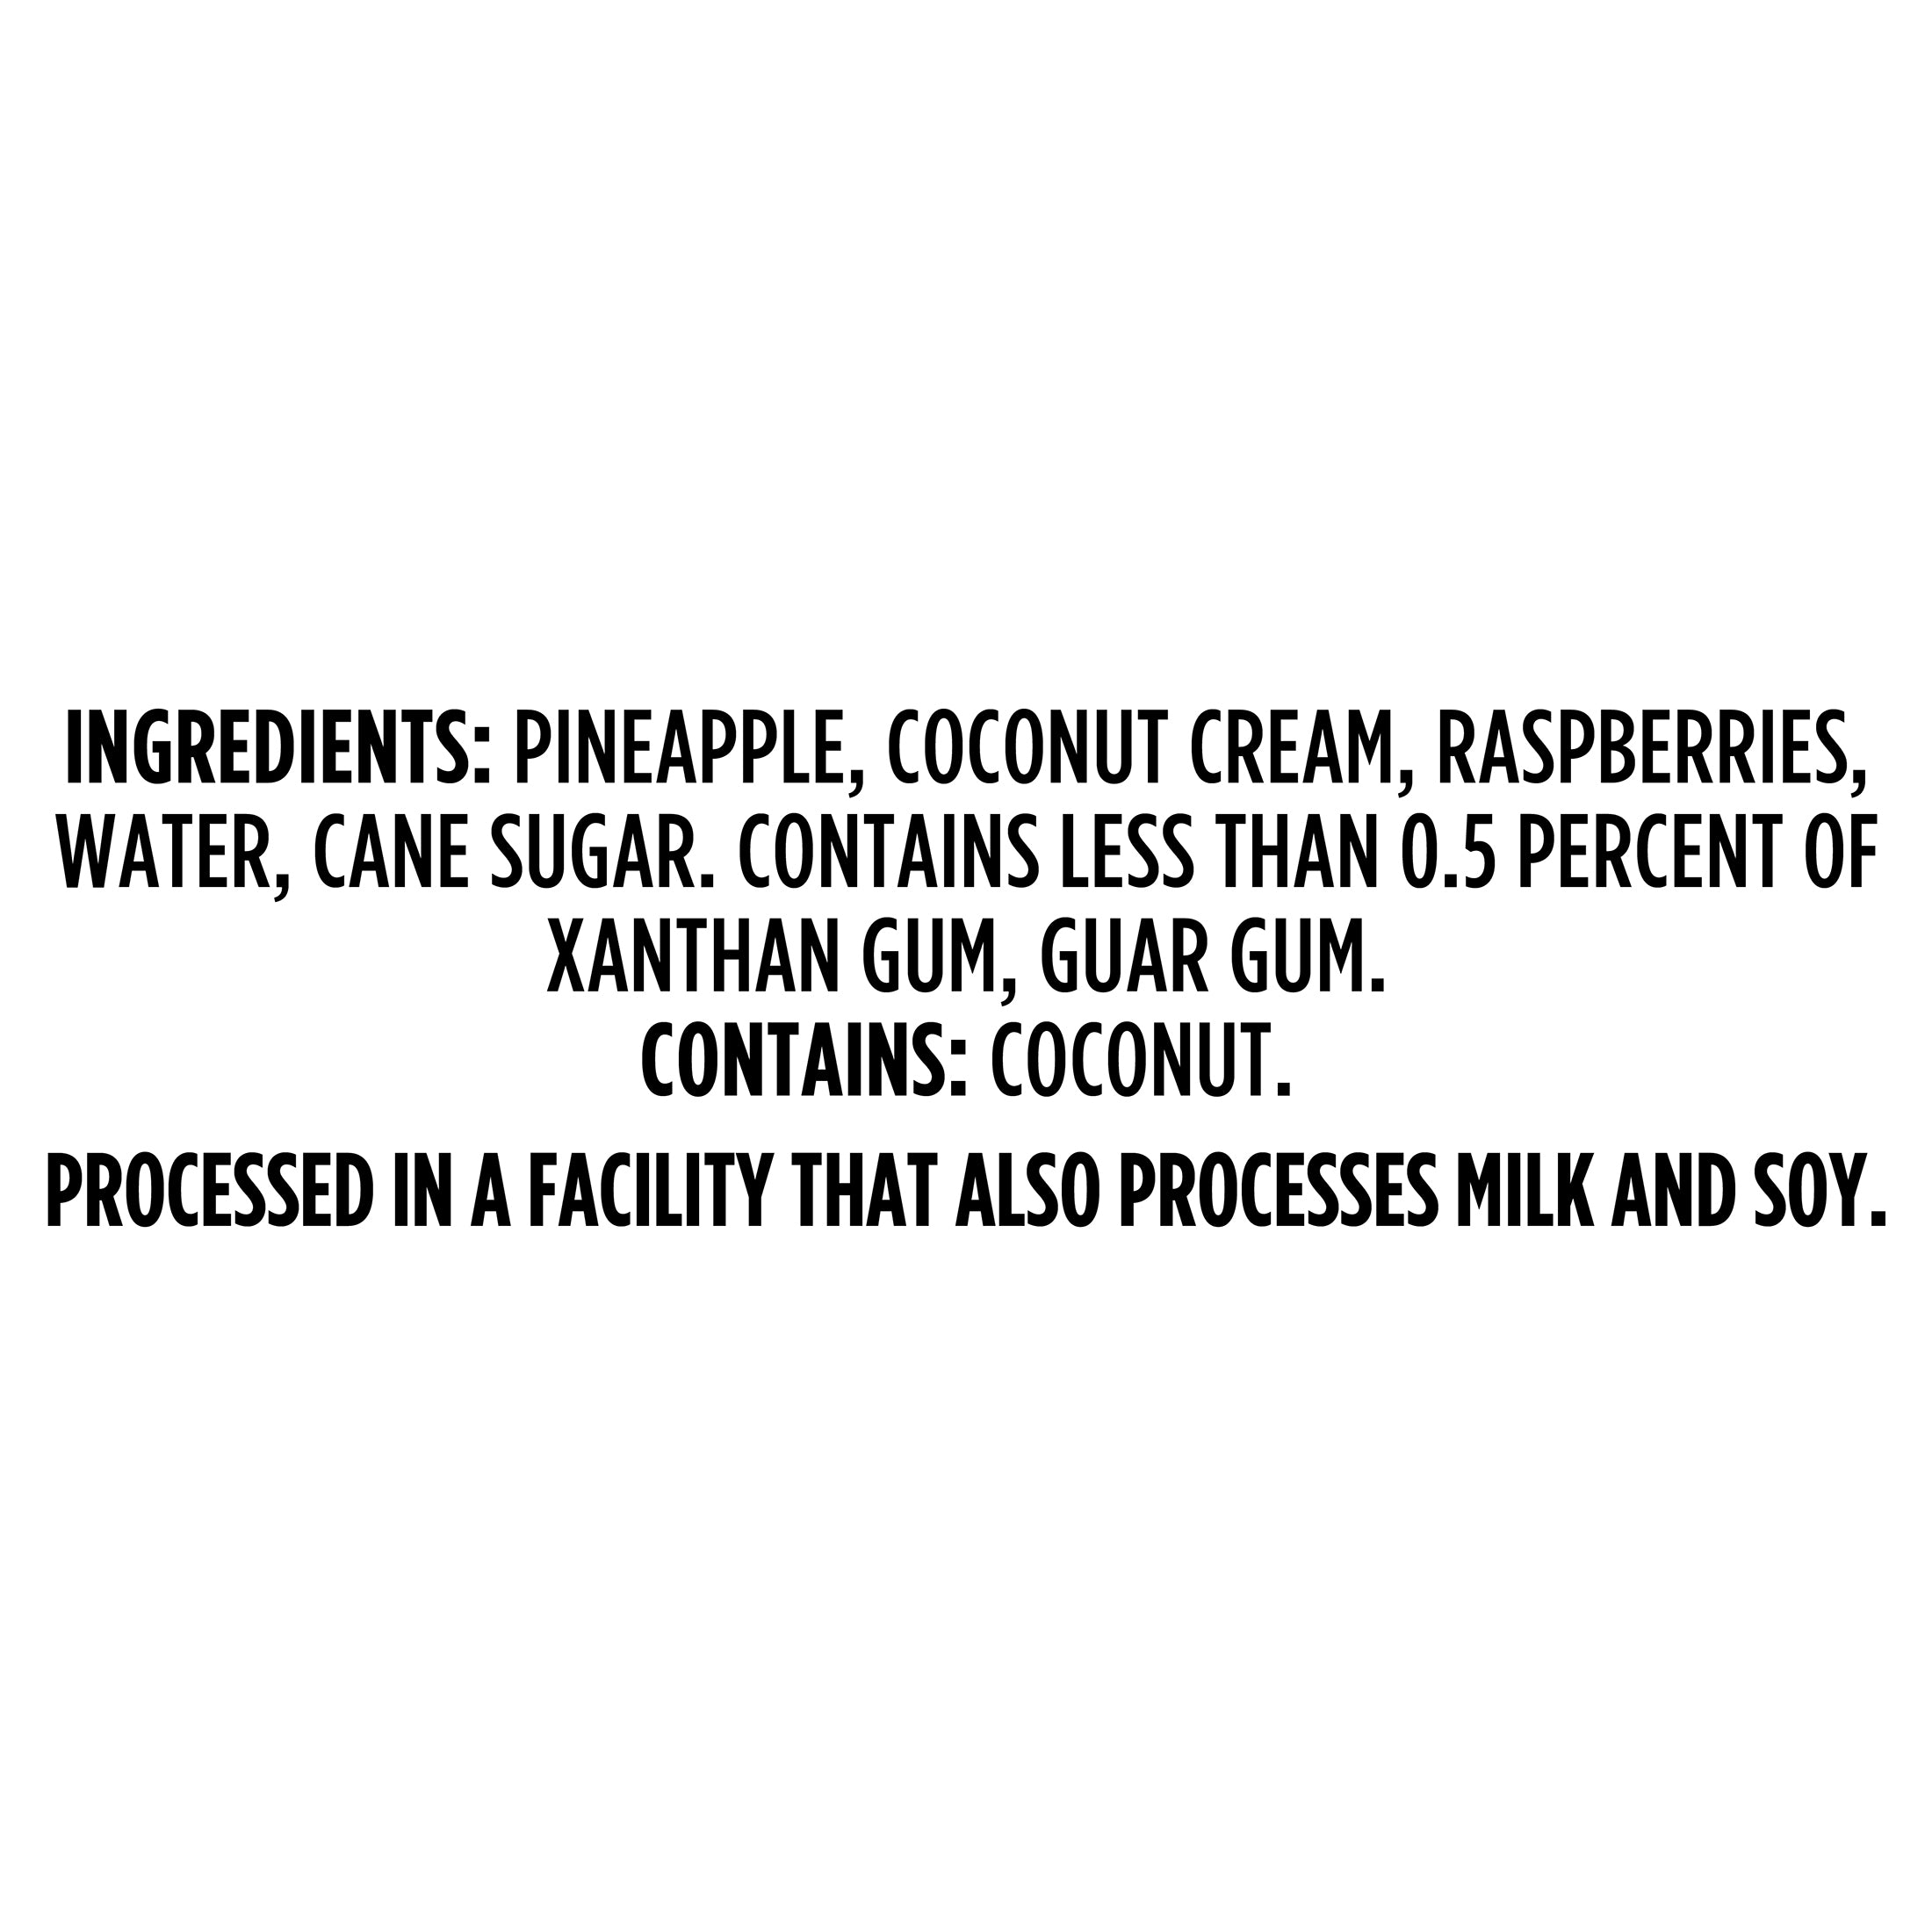 A list of ingredients for a Just Fruit - Coconut Bites pineapple coconut cream from Shop Wyman's.